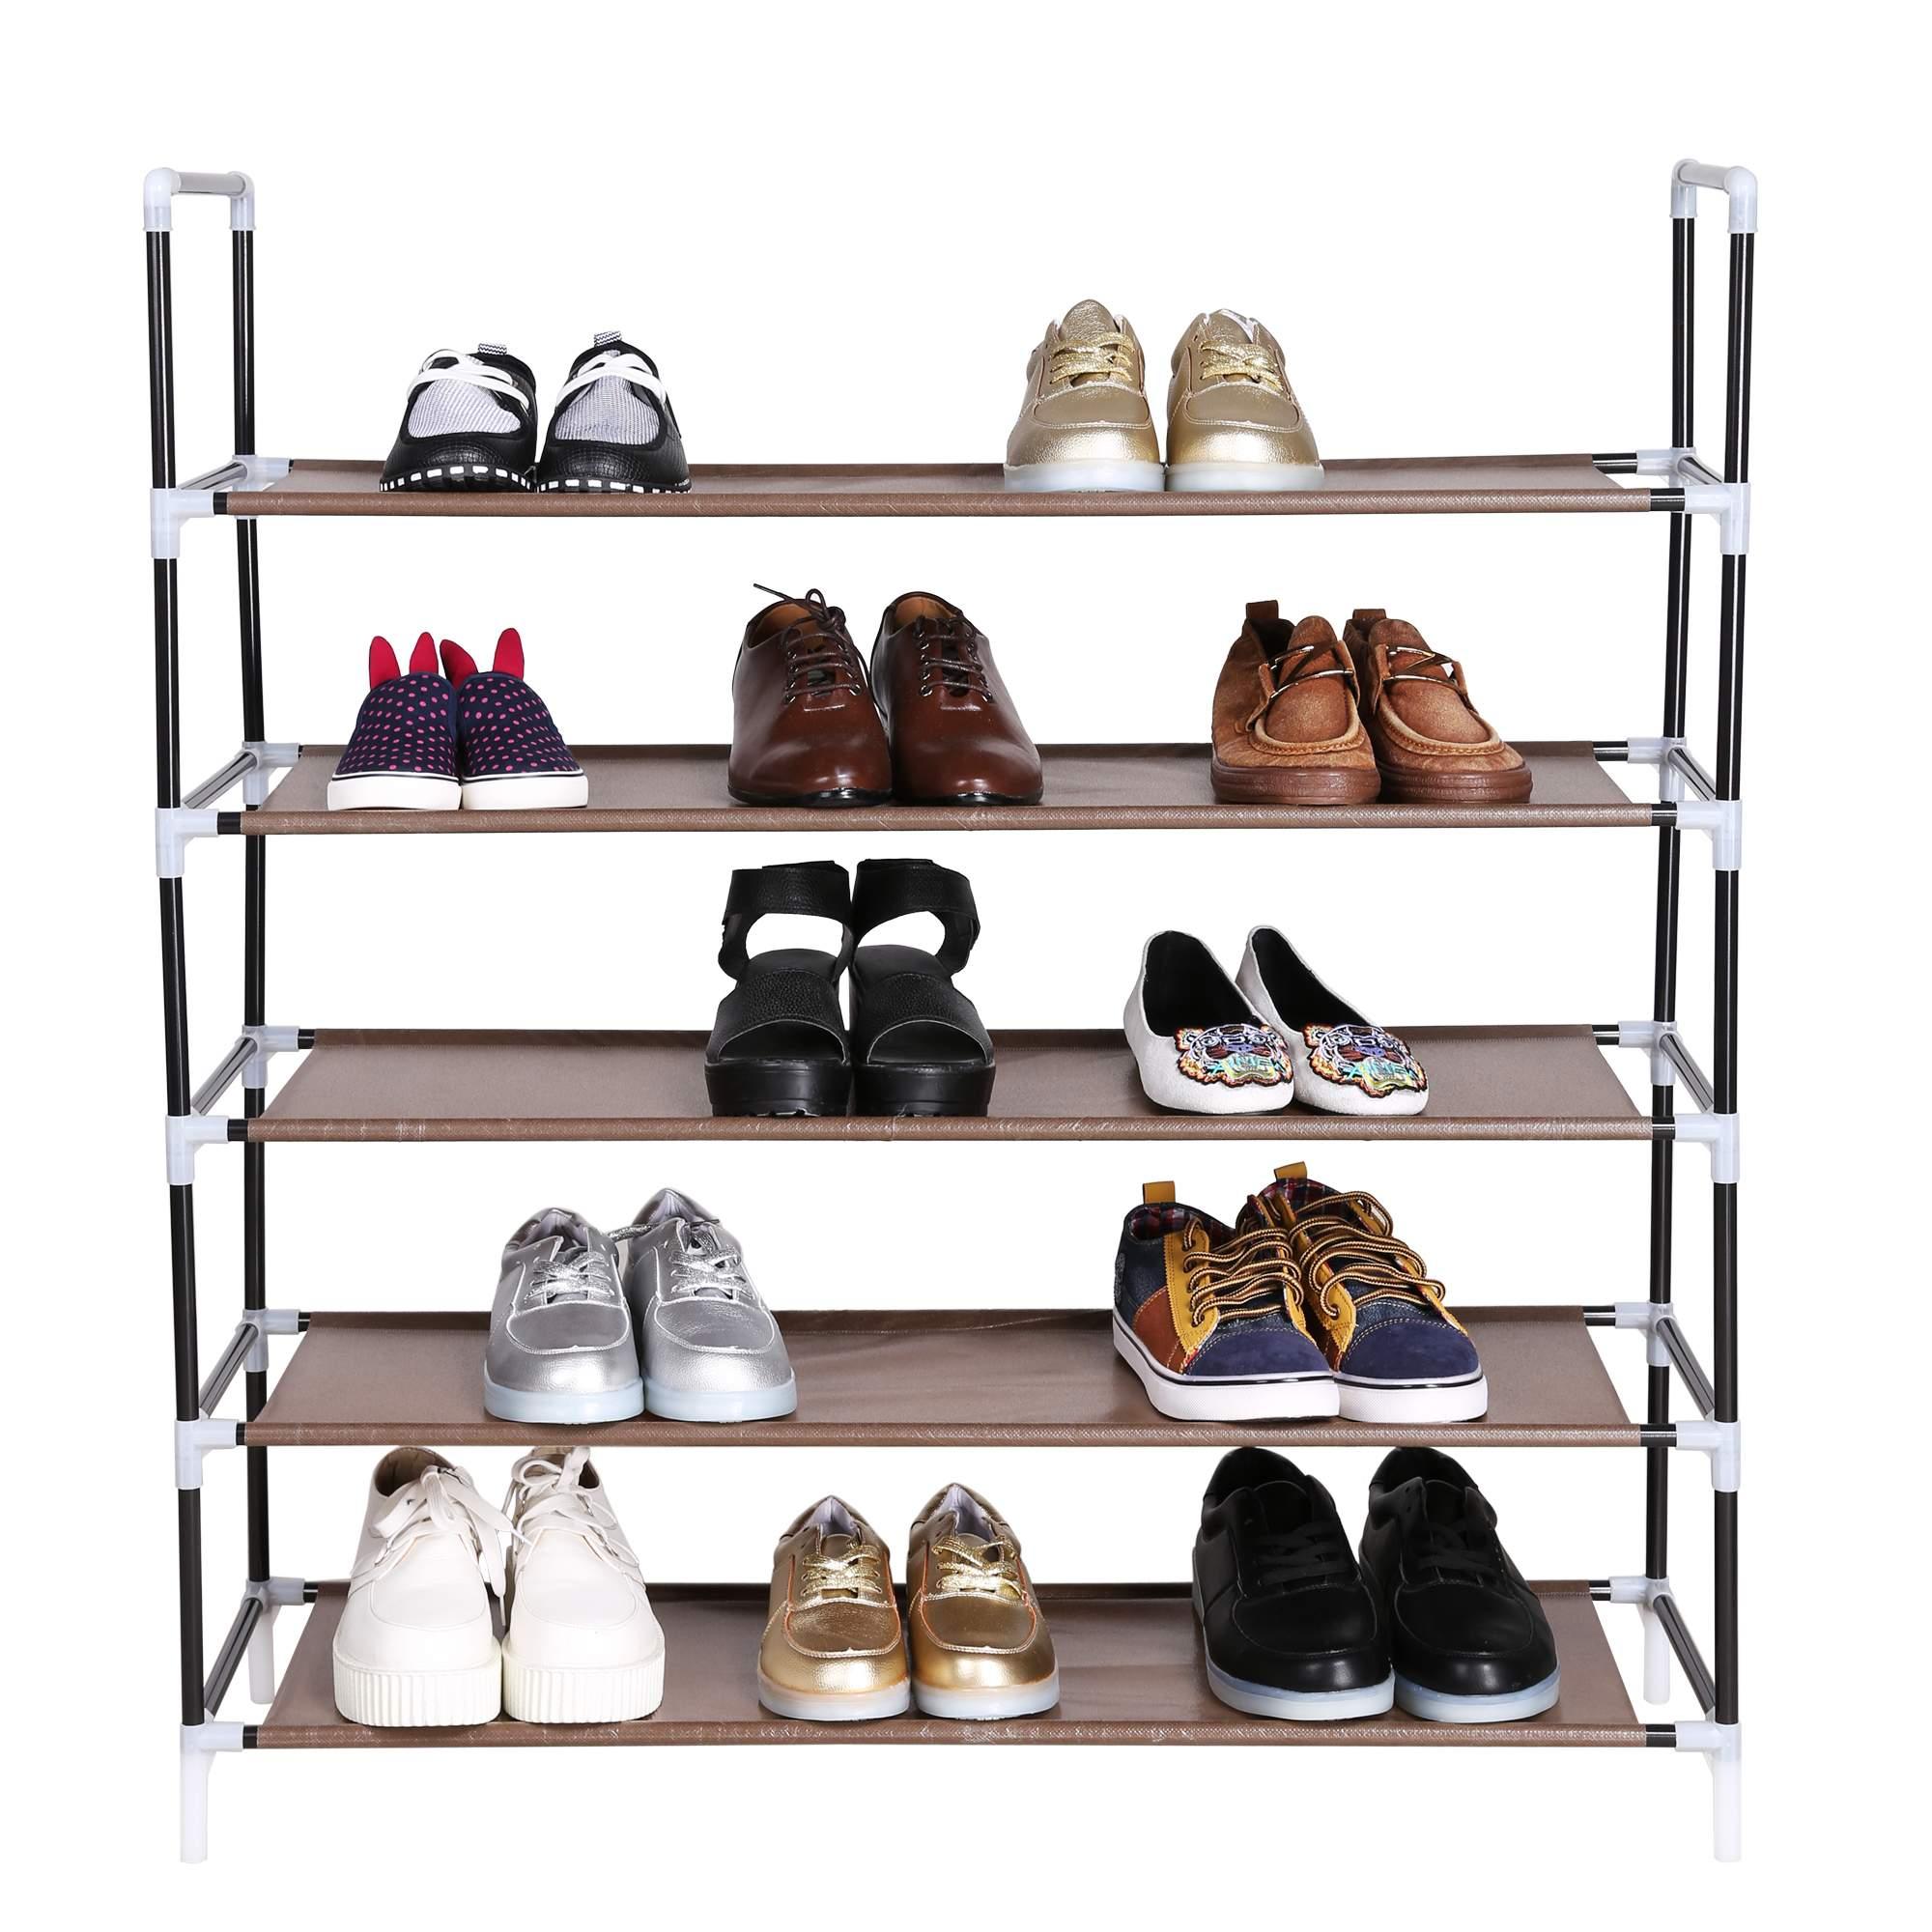 bestshopping Home Portable 5/8/10 Tier Shoes Rack Stand ...